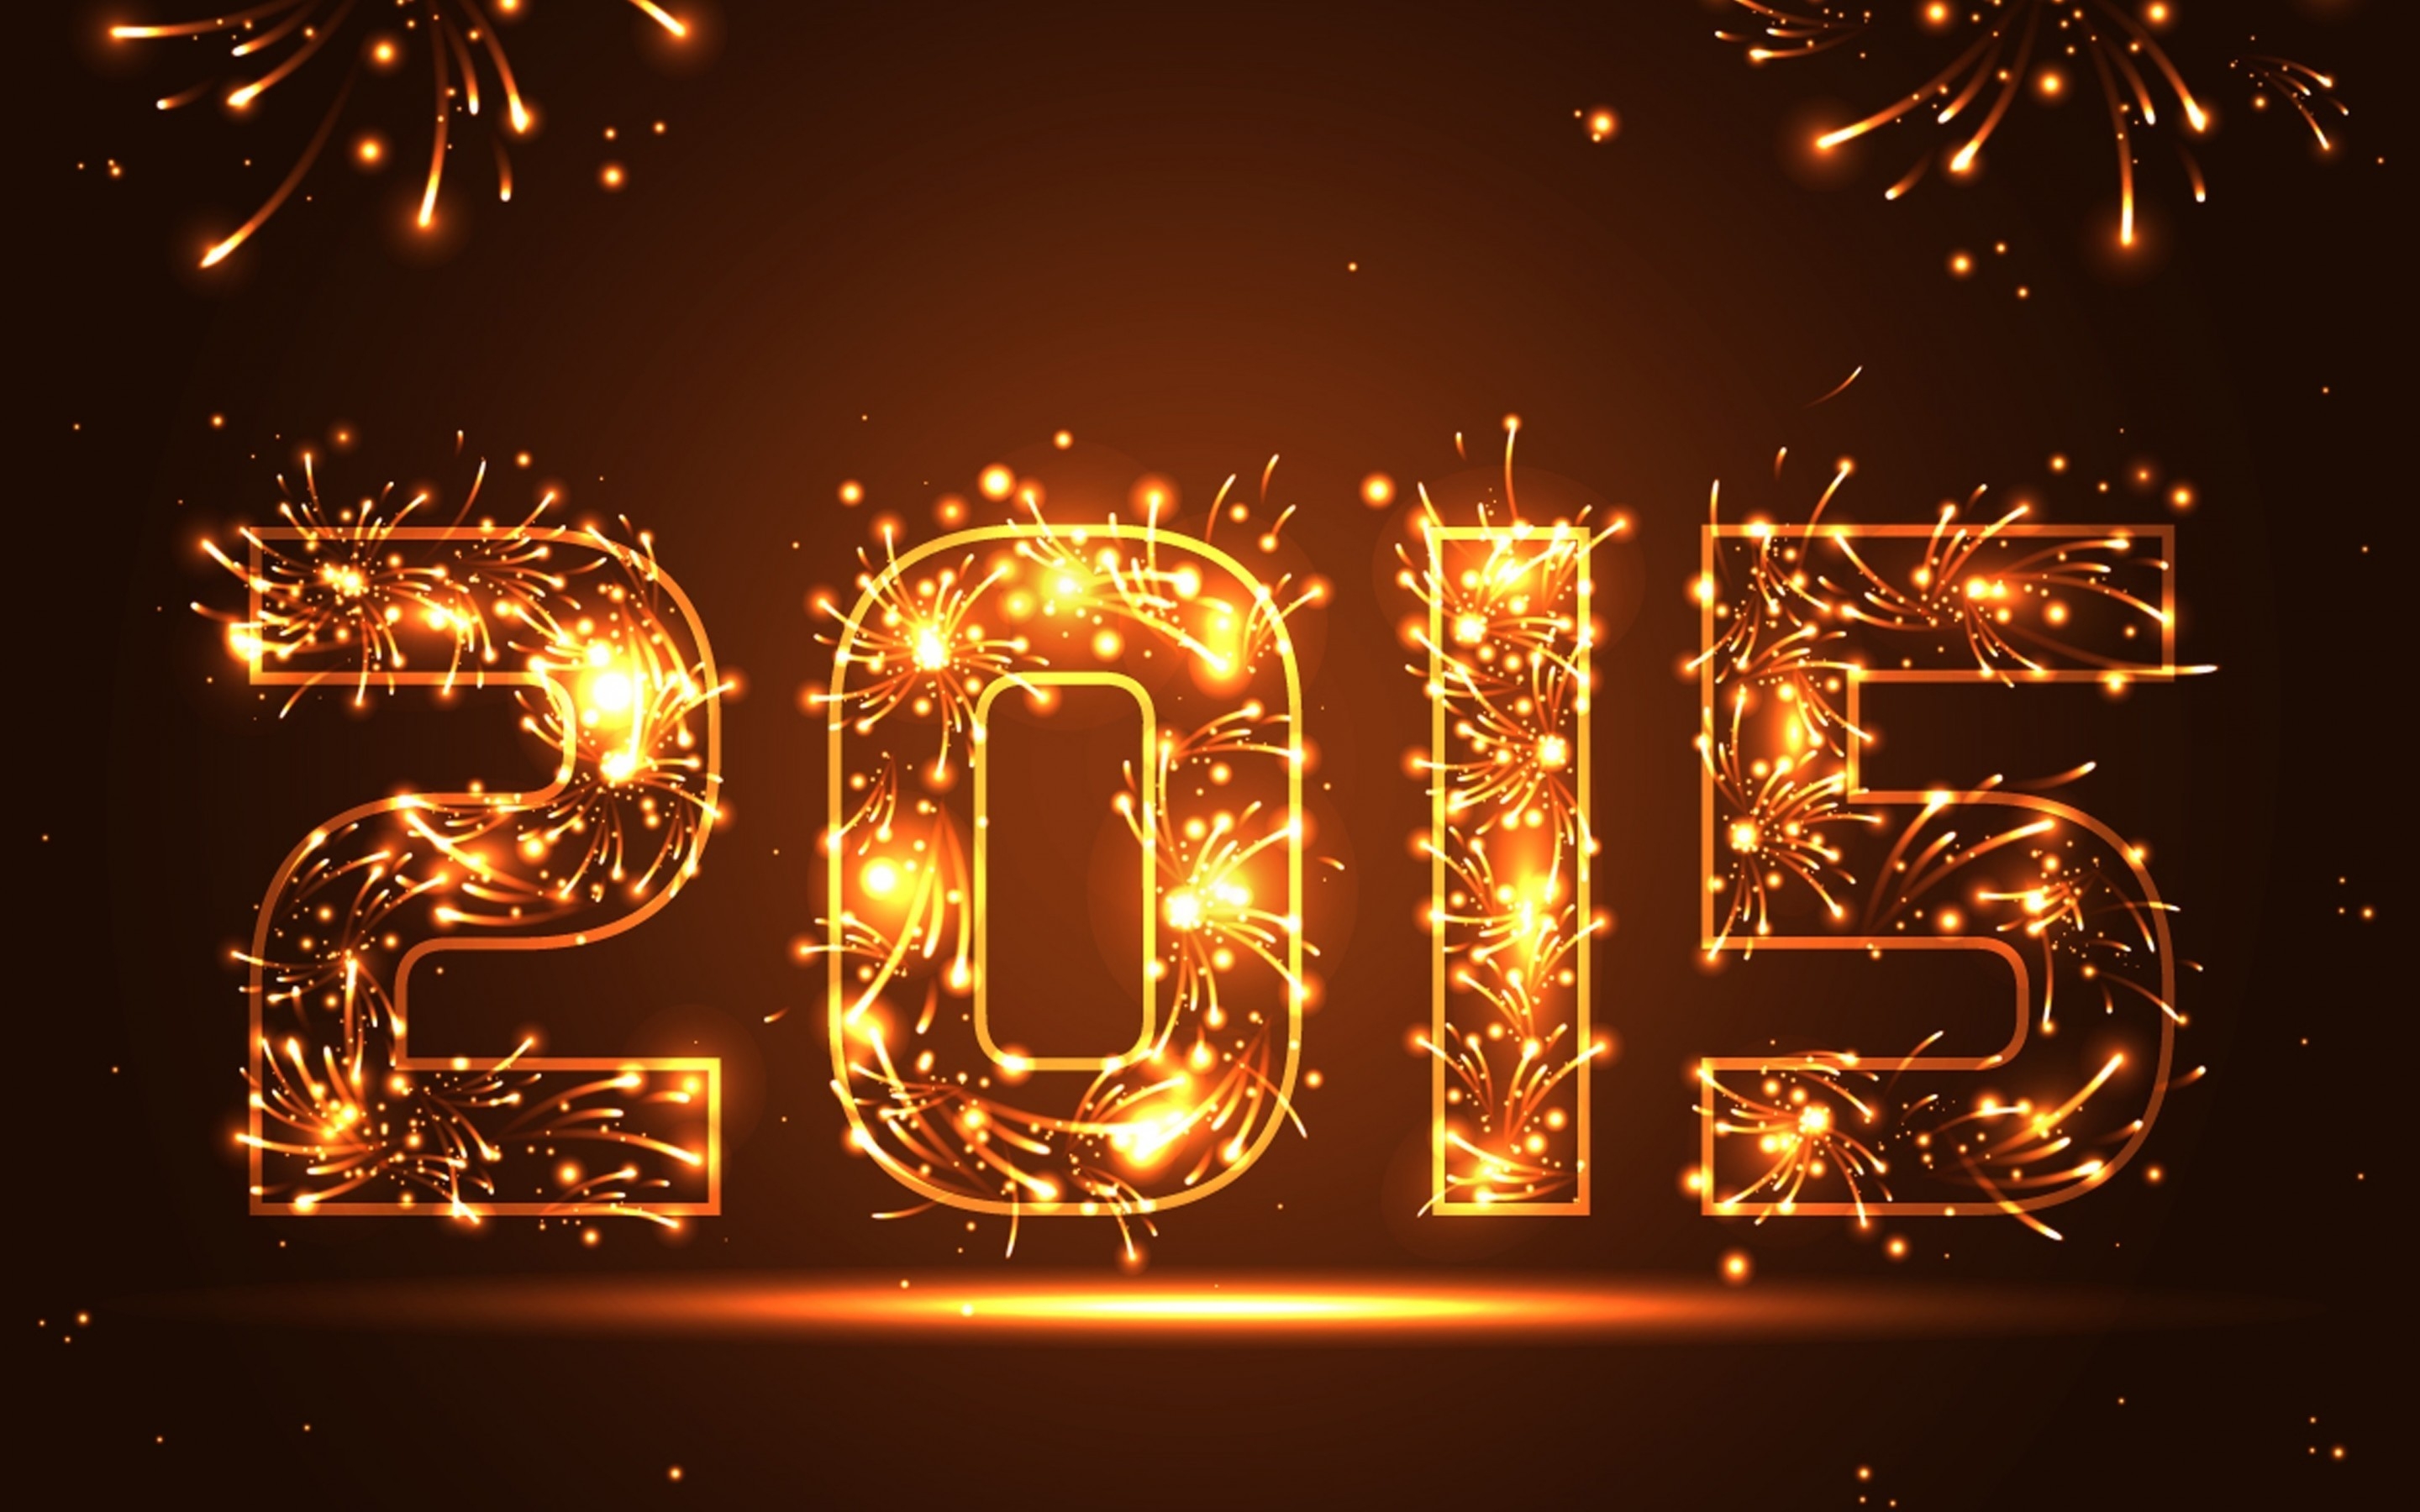 2015 New Year Fireworks for 2880 x 1800 Retina Display resolution